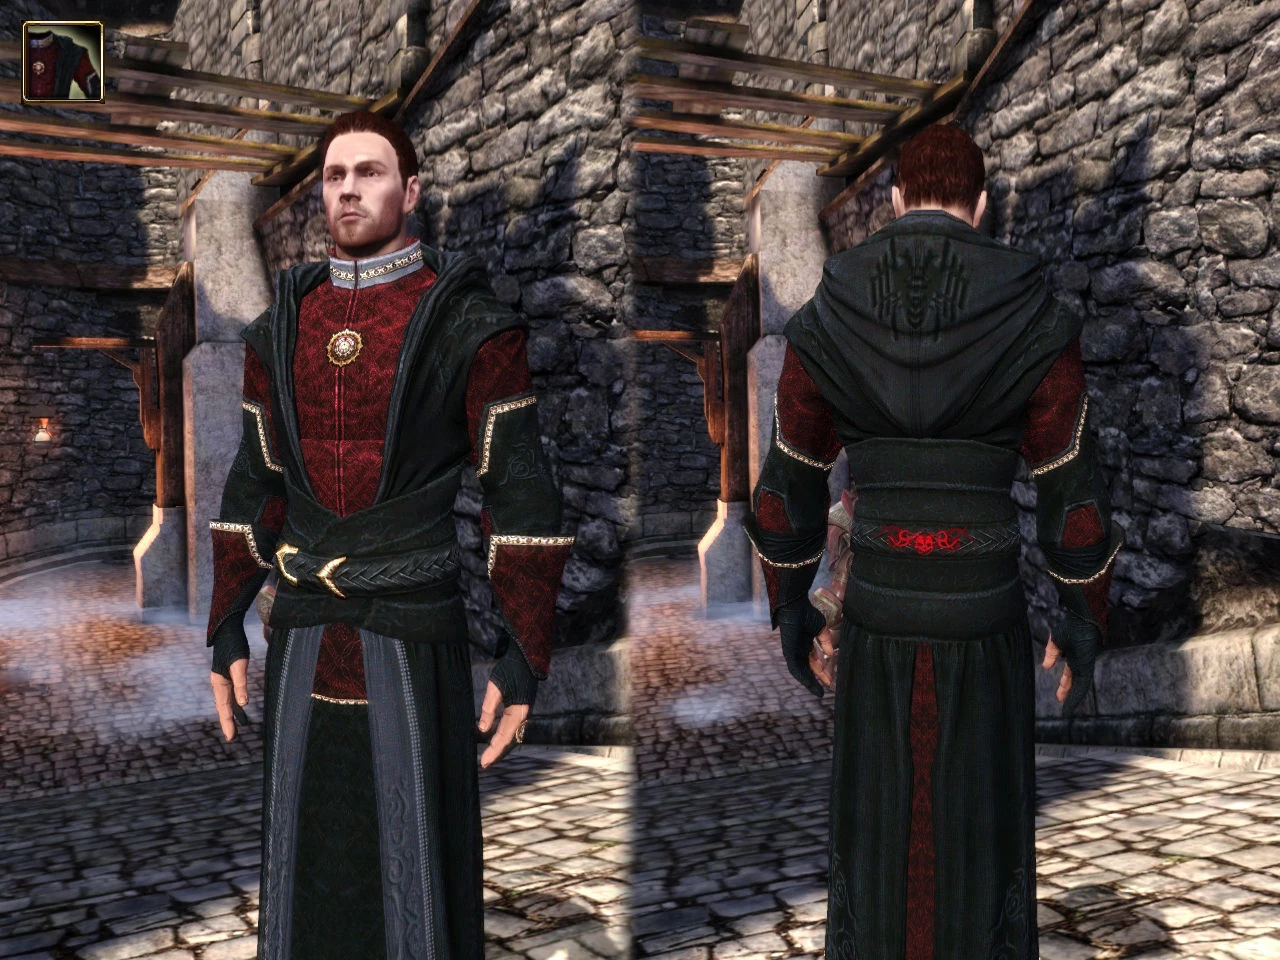 Dragon Age Inquisition Mage Robes : ReTexture Dalish Mage Armor at ...